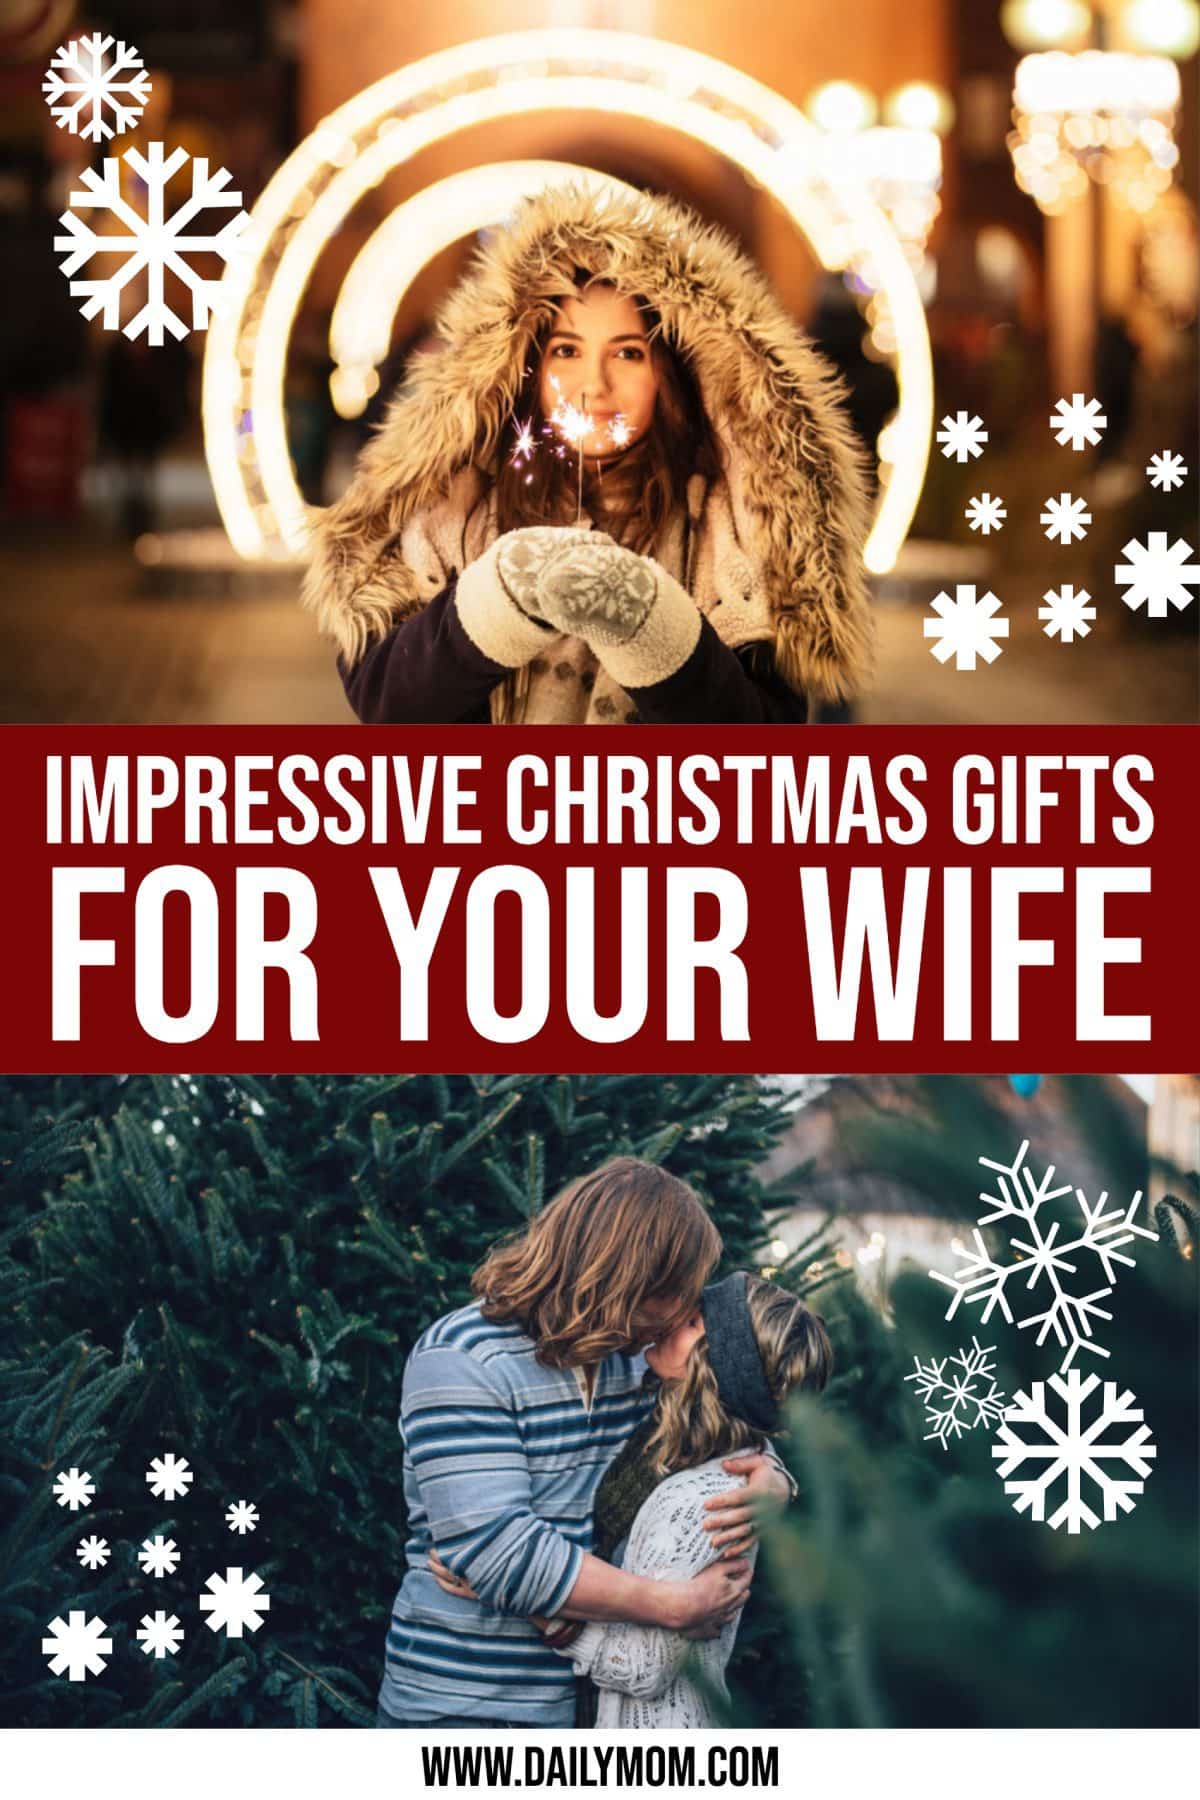 20 Impressive Christmas Gifts For Your Wife 2019